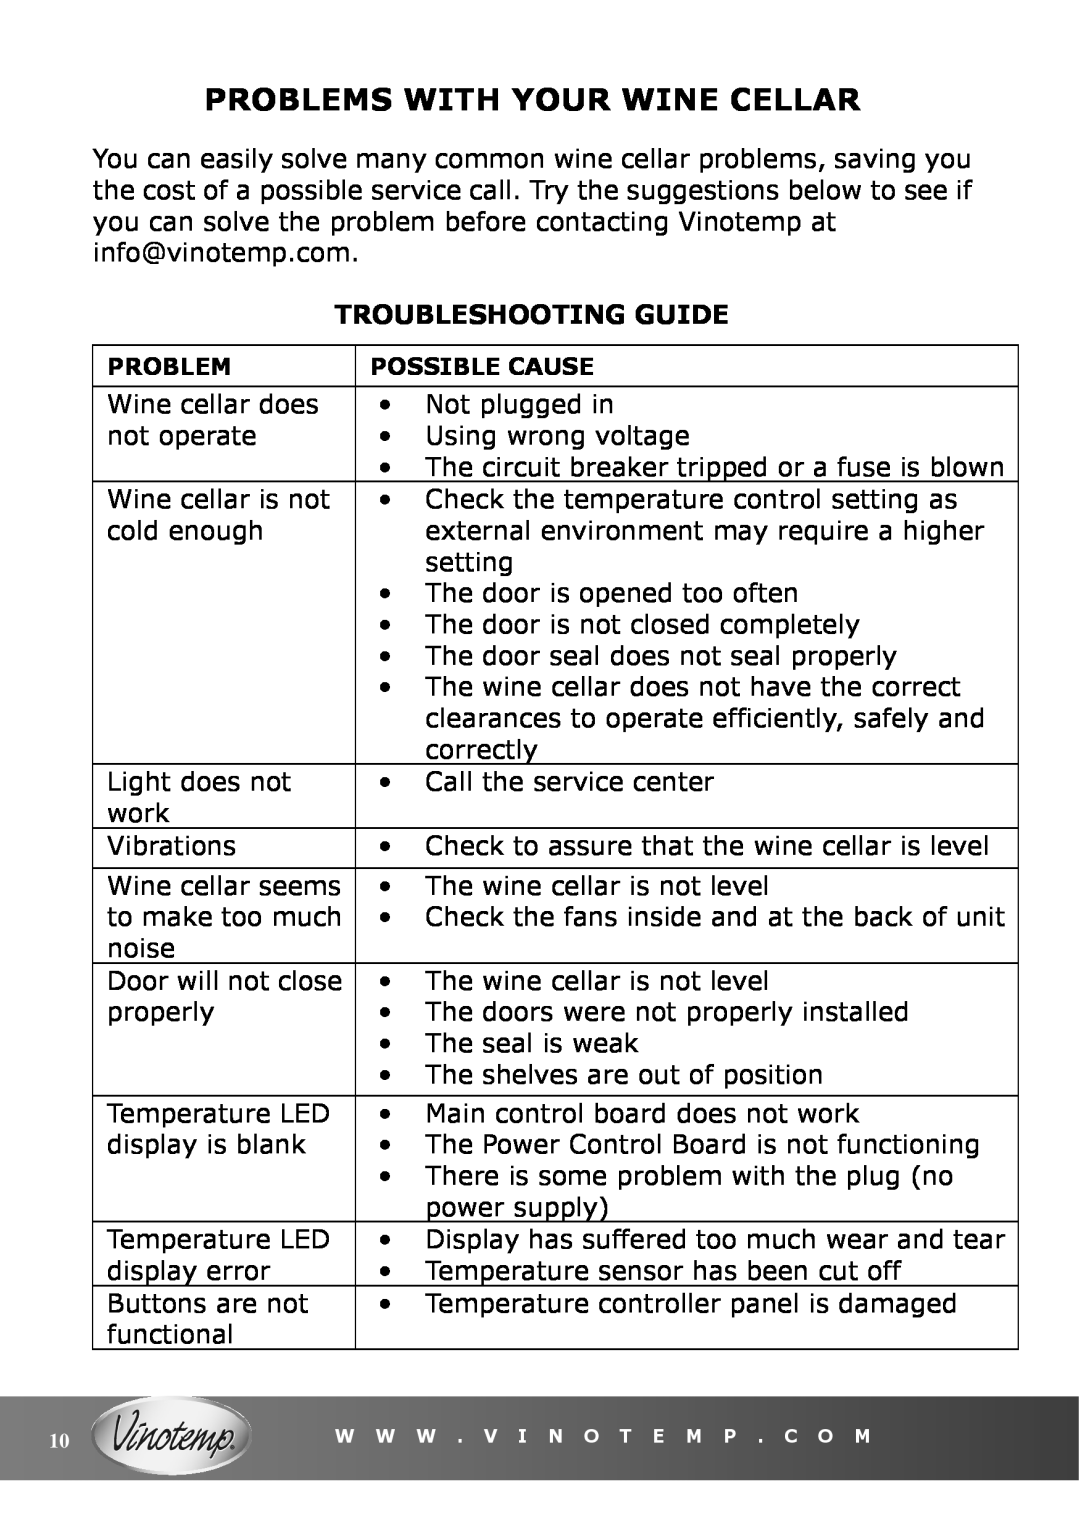 Vinotemp VT-6TEDS owner manual Problems With Your Wine Cellar, Troubleshooting Guide 